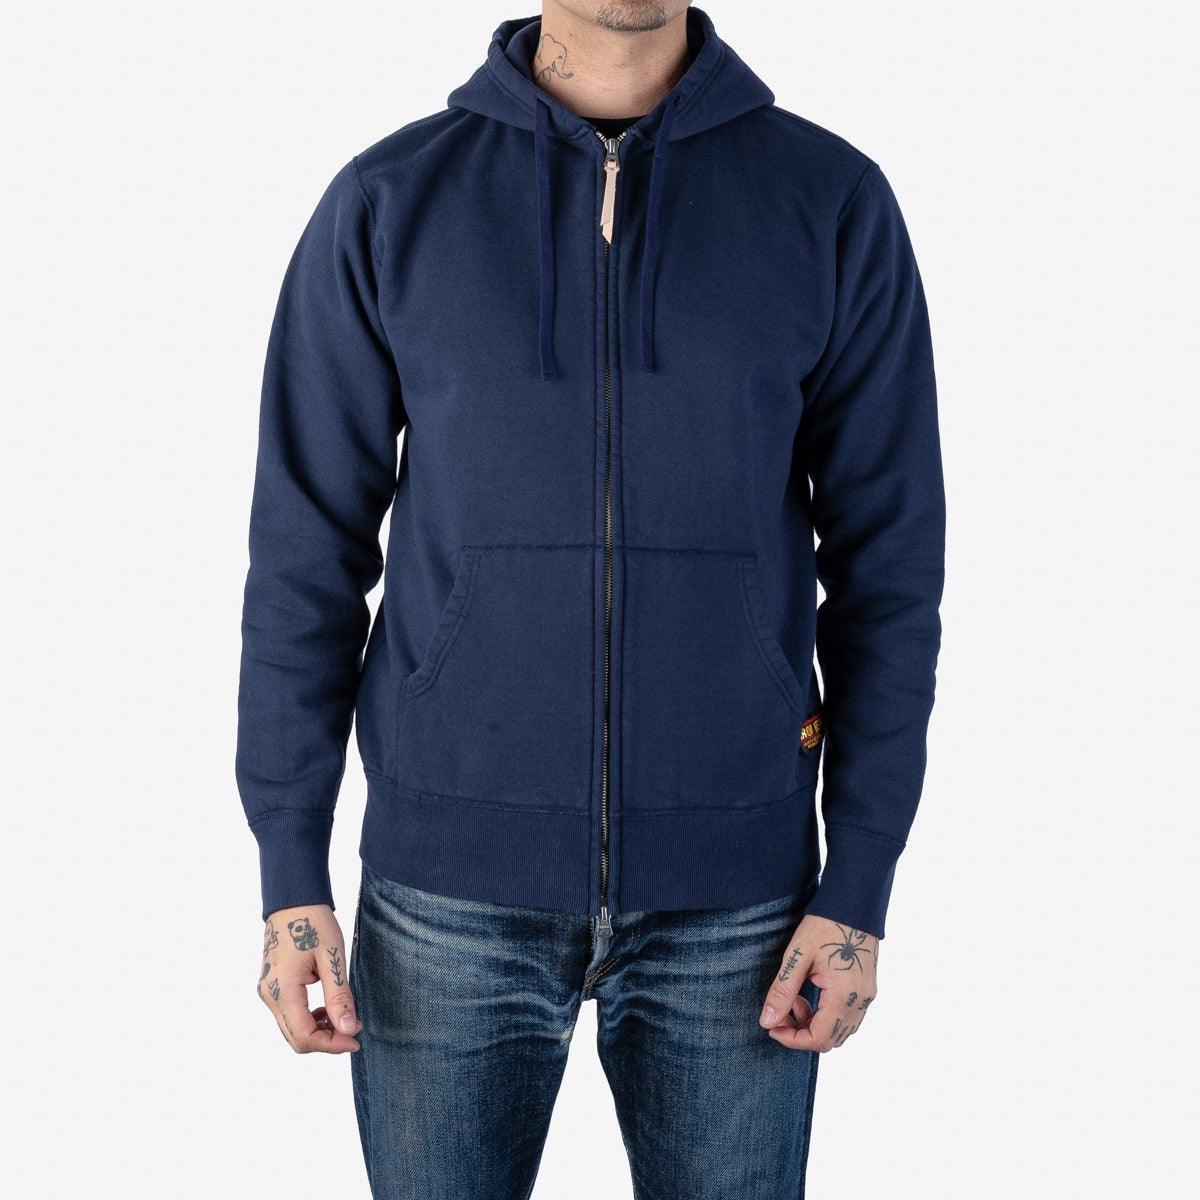 Image showing the IHSW-10-NAV - 14oz Ultra Heavyweight Loopwheel Cotton Hoodie Navy which is a Sweatshirts described by the following info IHSALE, Iron Heart, Released, Sweatshirts, Tops and sold on the IRON HEART GERMANY online store